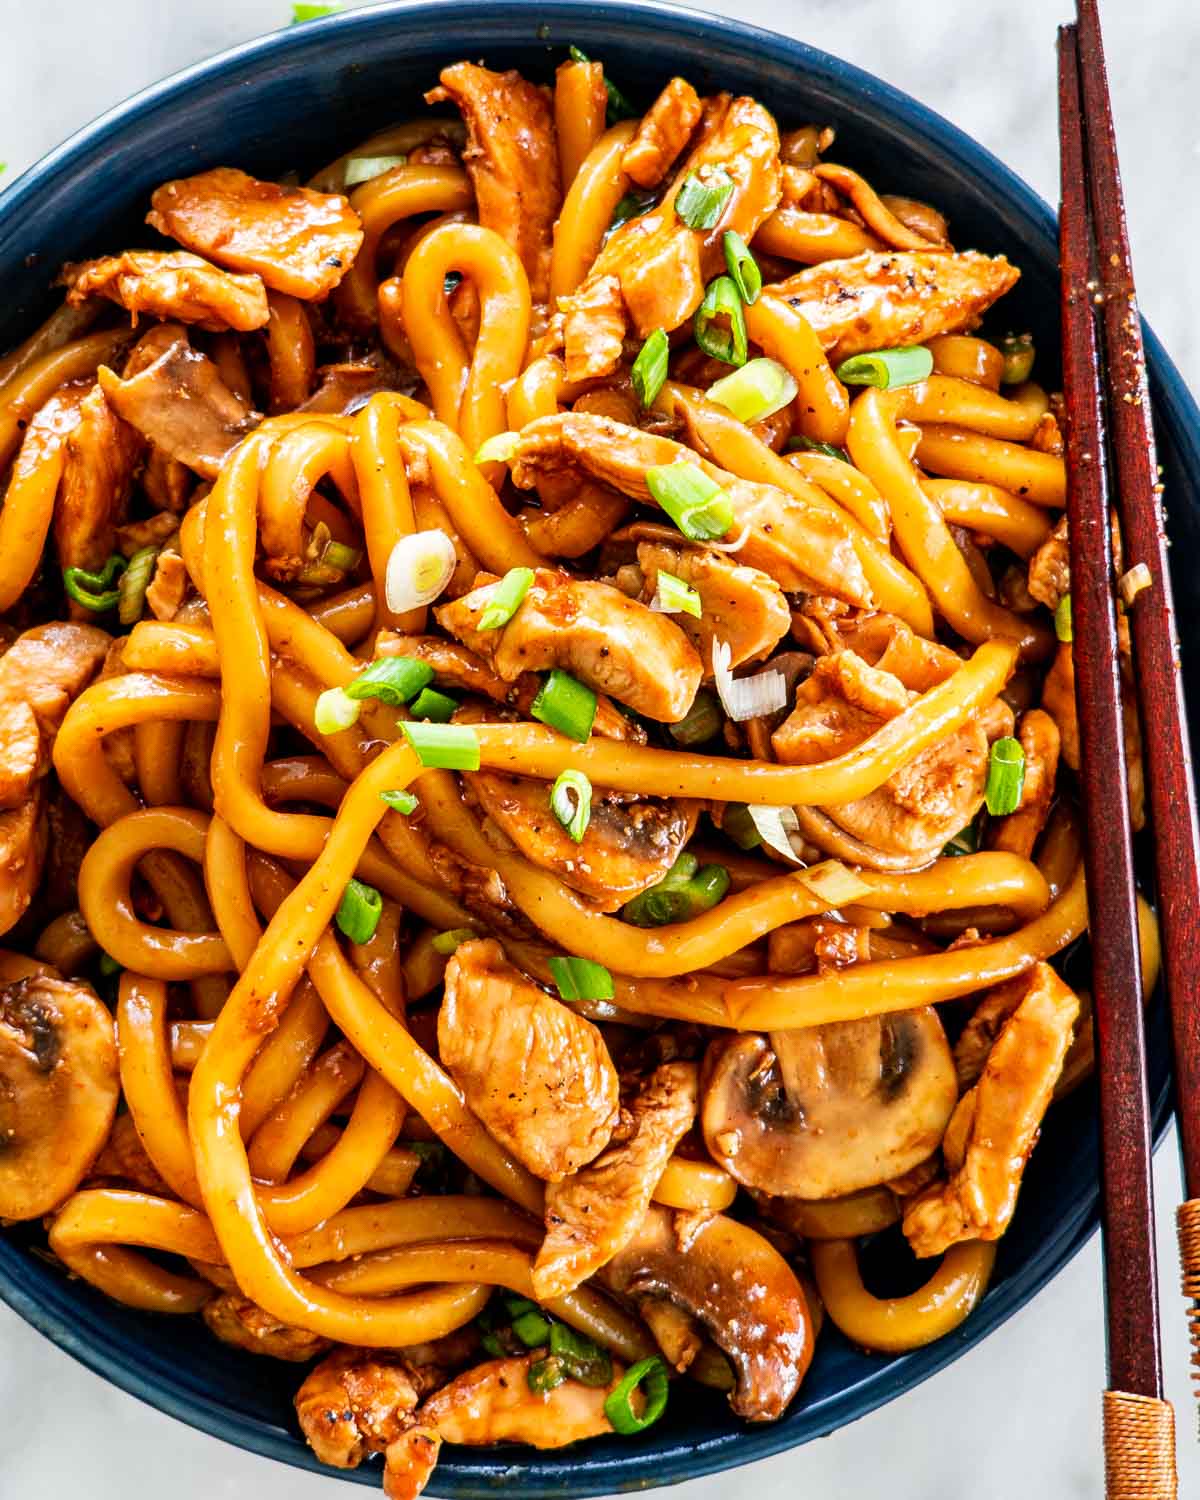 overhead shot of hoisin chicken udon noodles in a blue bowl garnished with green onions and a pair of chopsticks on the plate